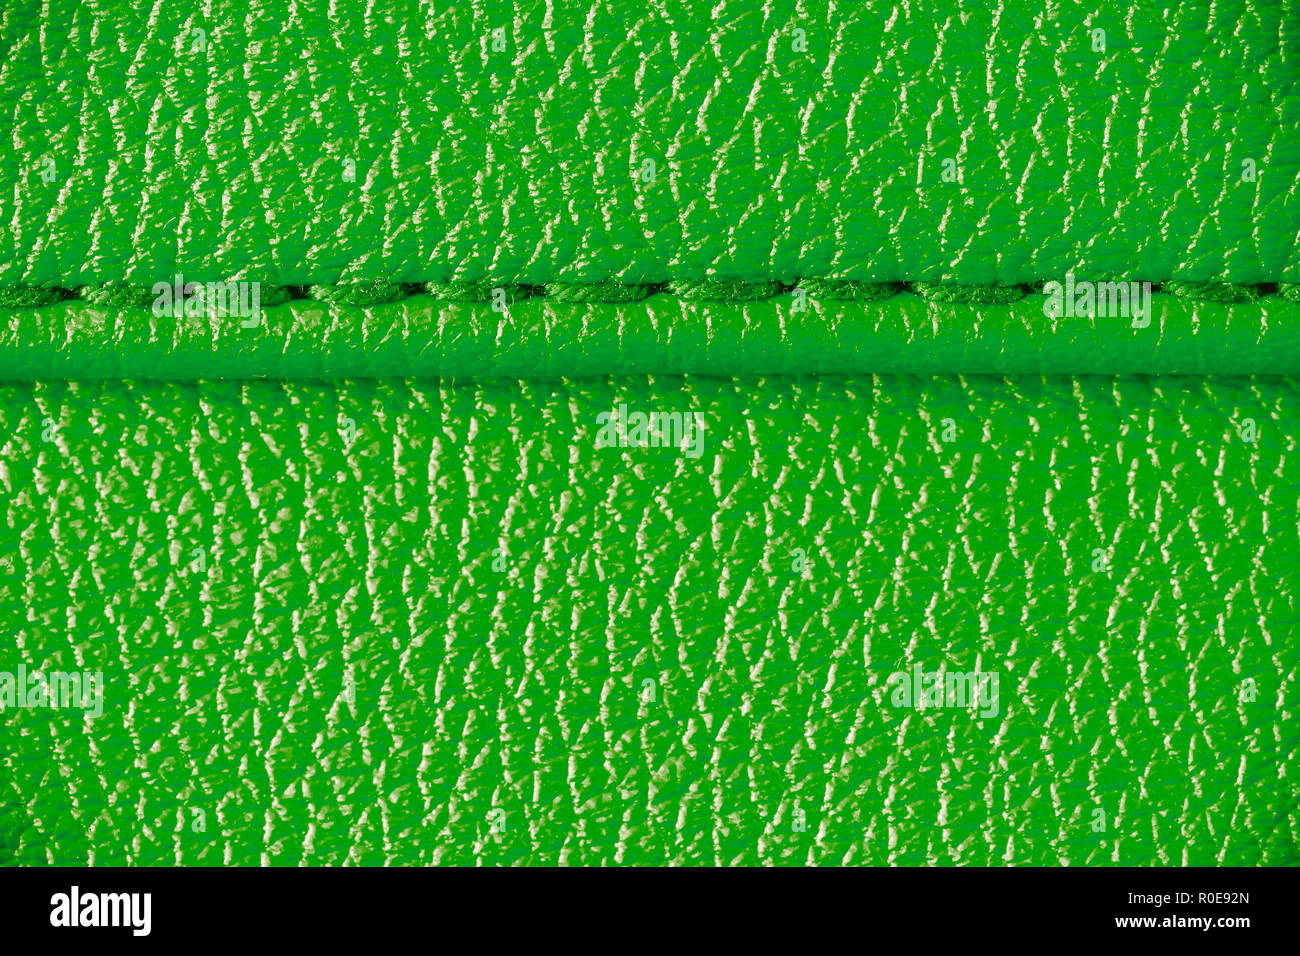 Two layers of green leather textile sewed stitched tightly together under high magnification close detail photography as surface texture background. Stock Photo